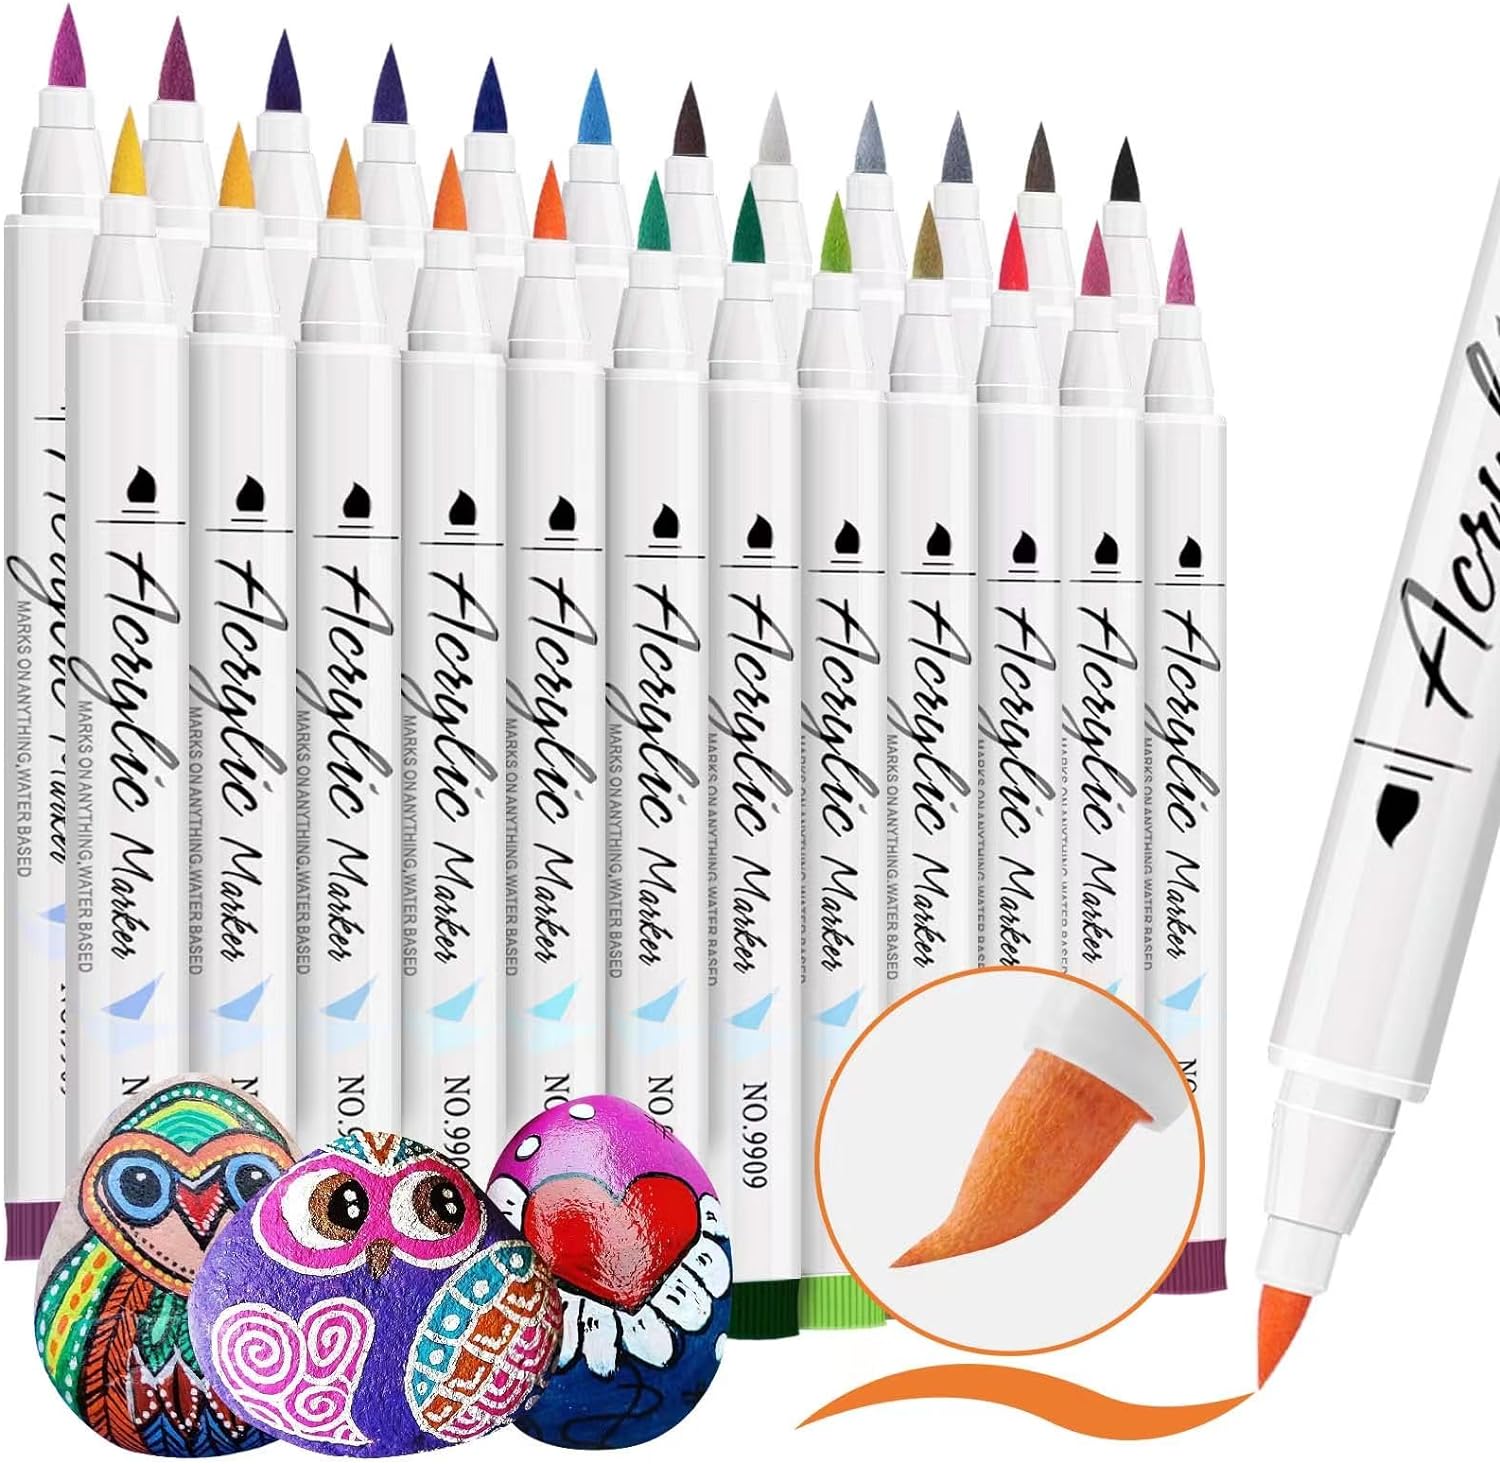 Arteza Acrylic Paint Markers, Set of 40 Assorted Color Pens with